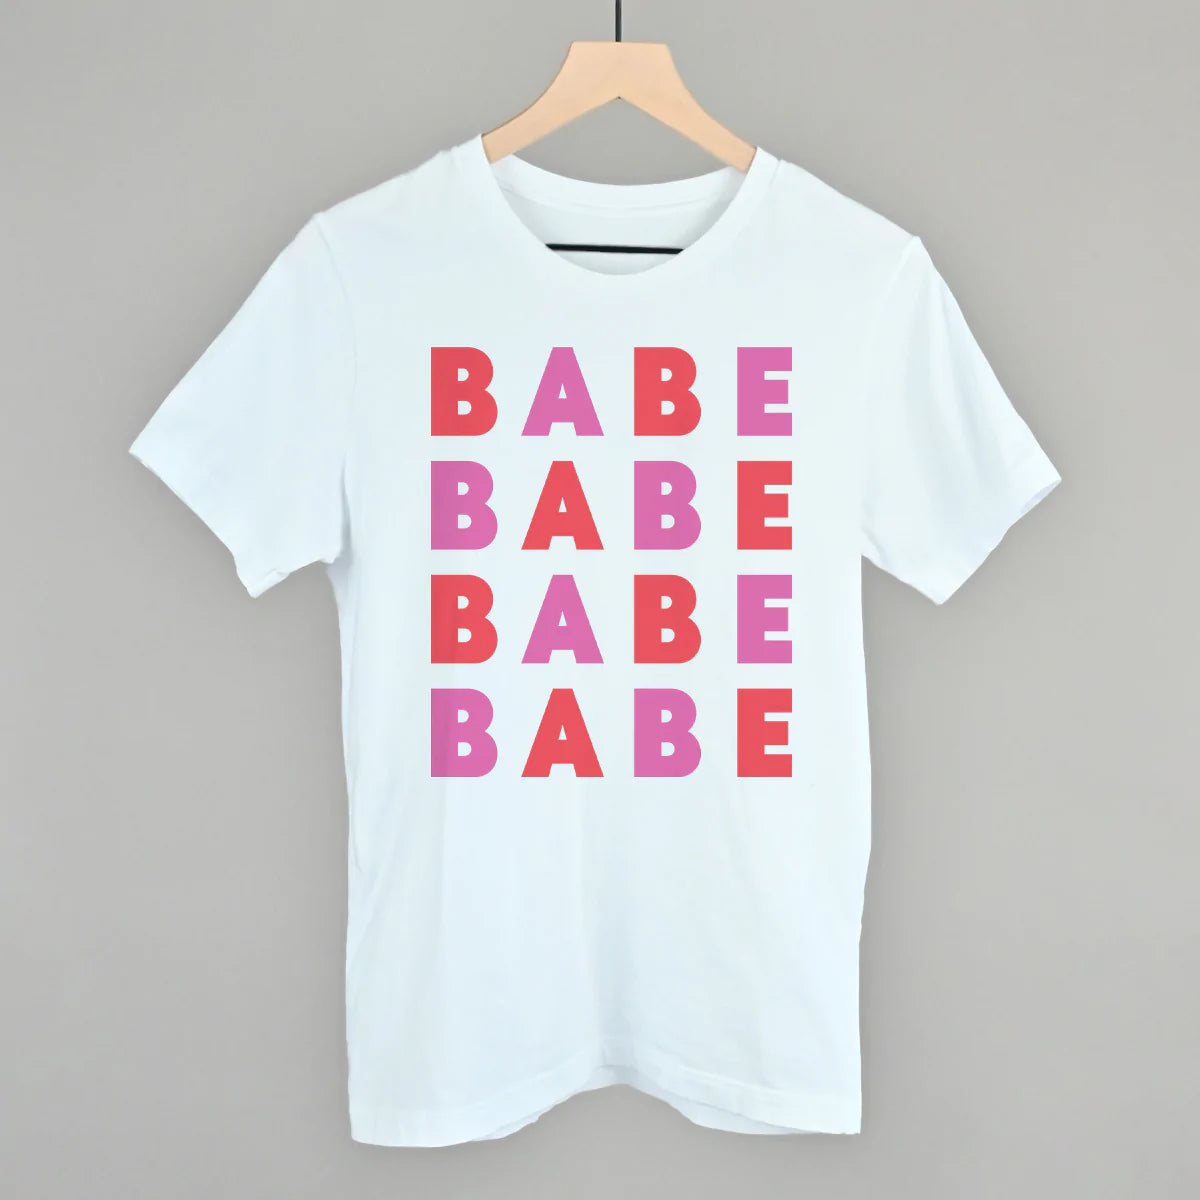 Babe (Repeated)